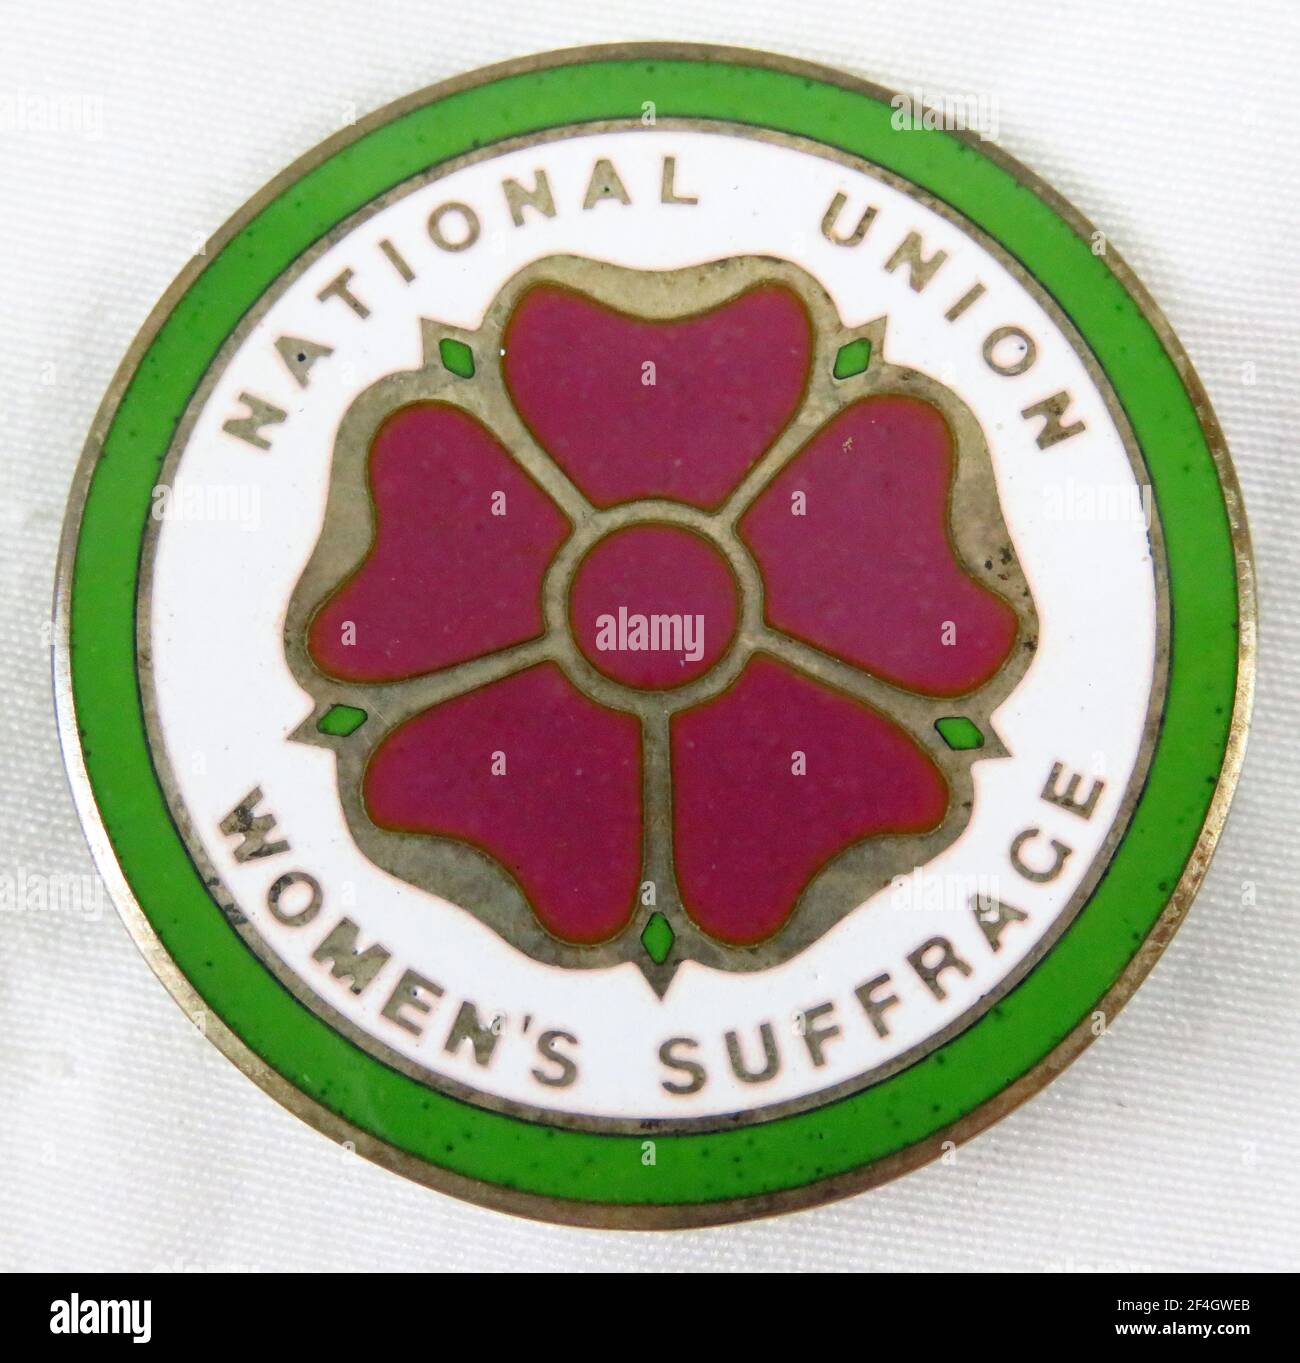 Red, green, and white enamel pin with a stylized five-petalled red rose and the text 'National Union Women's Suffrage, ' manufactured by the National Union of Women Suffrage Societies (NUWSS), for the British market, 1900. Photography by Emilia van Beugen. () Stock Photo